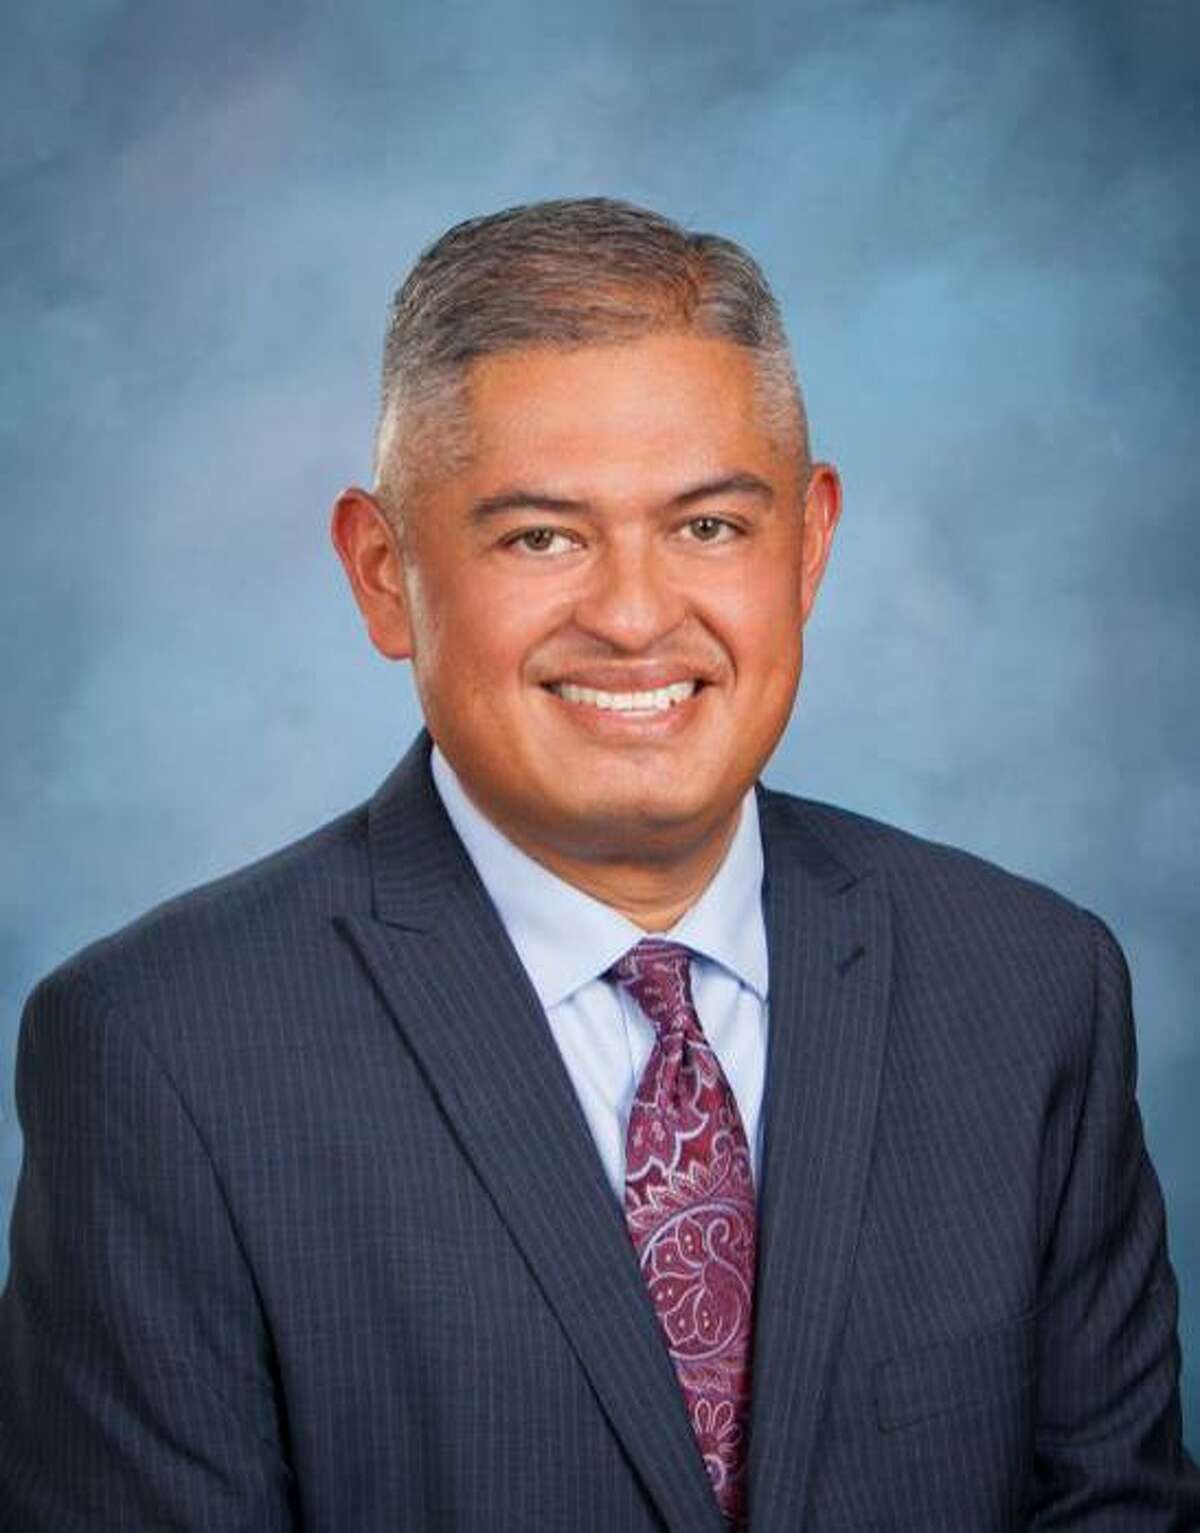 Eduardo Hernandez is the lone finalist for superintendent of Edgewood ISD, the district’s board members decided Thursday evening.